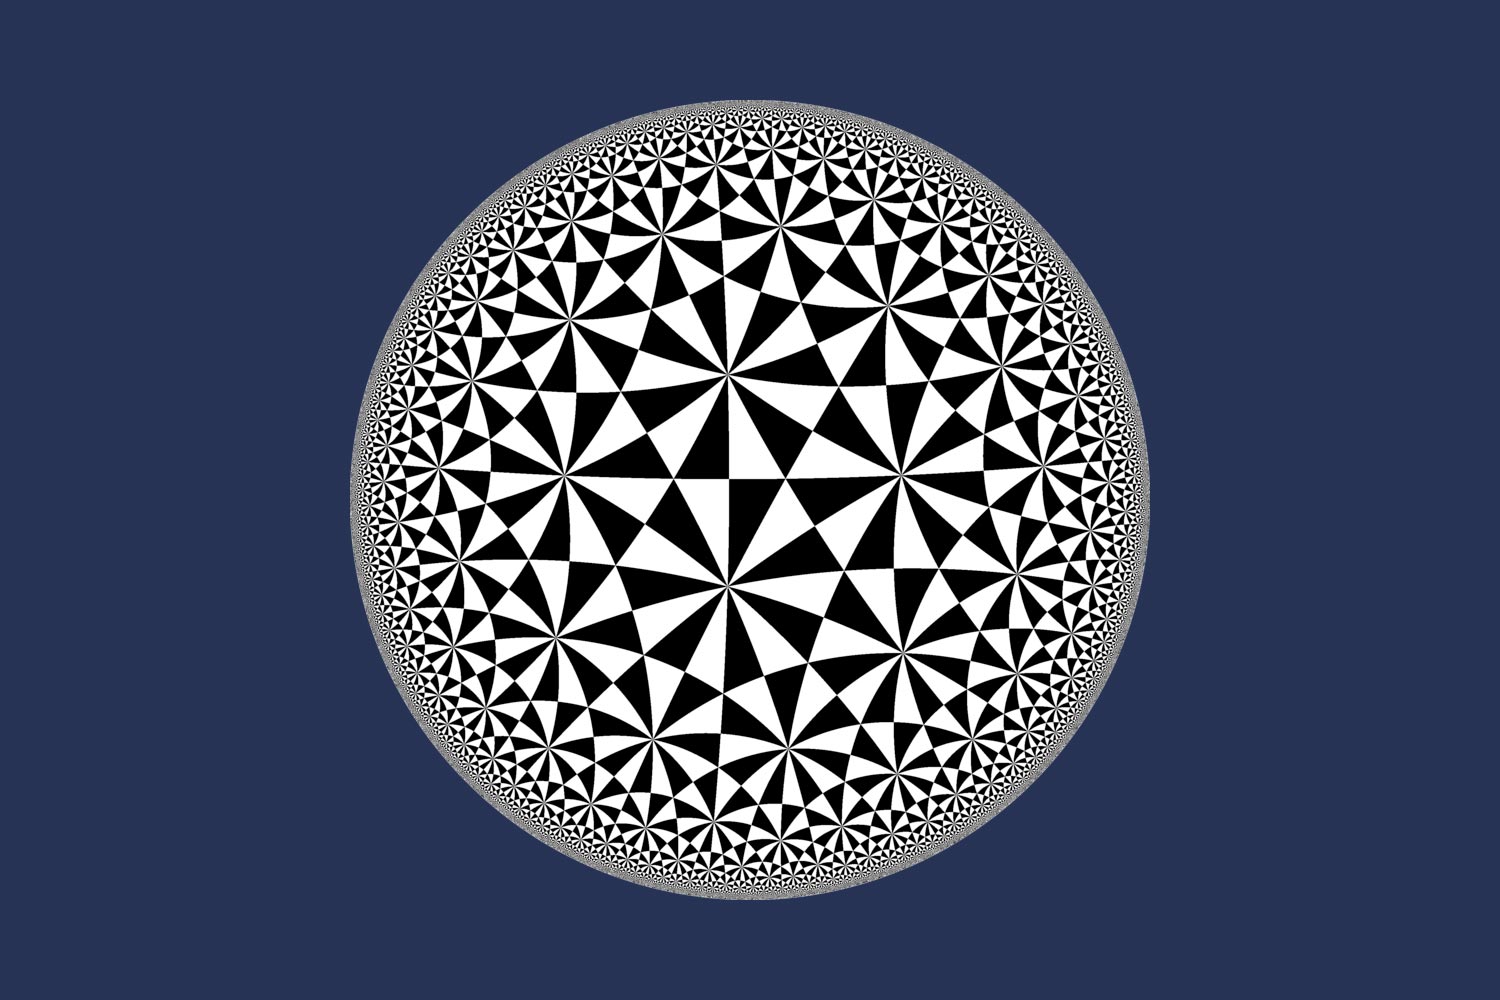 A pattern in the hyperbolic plane